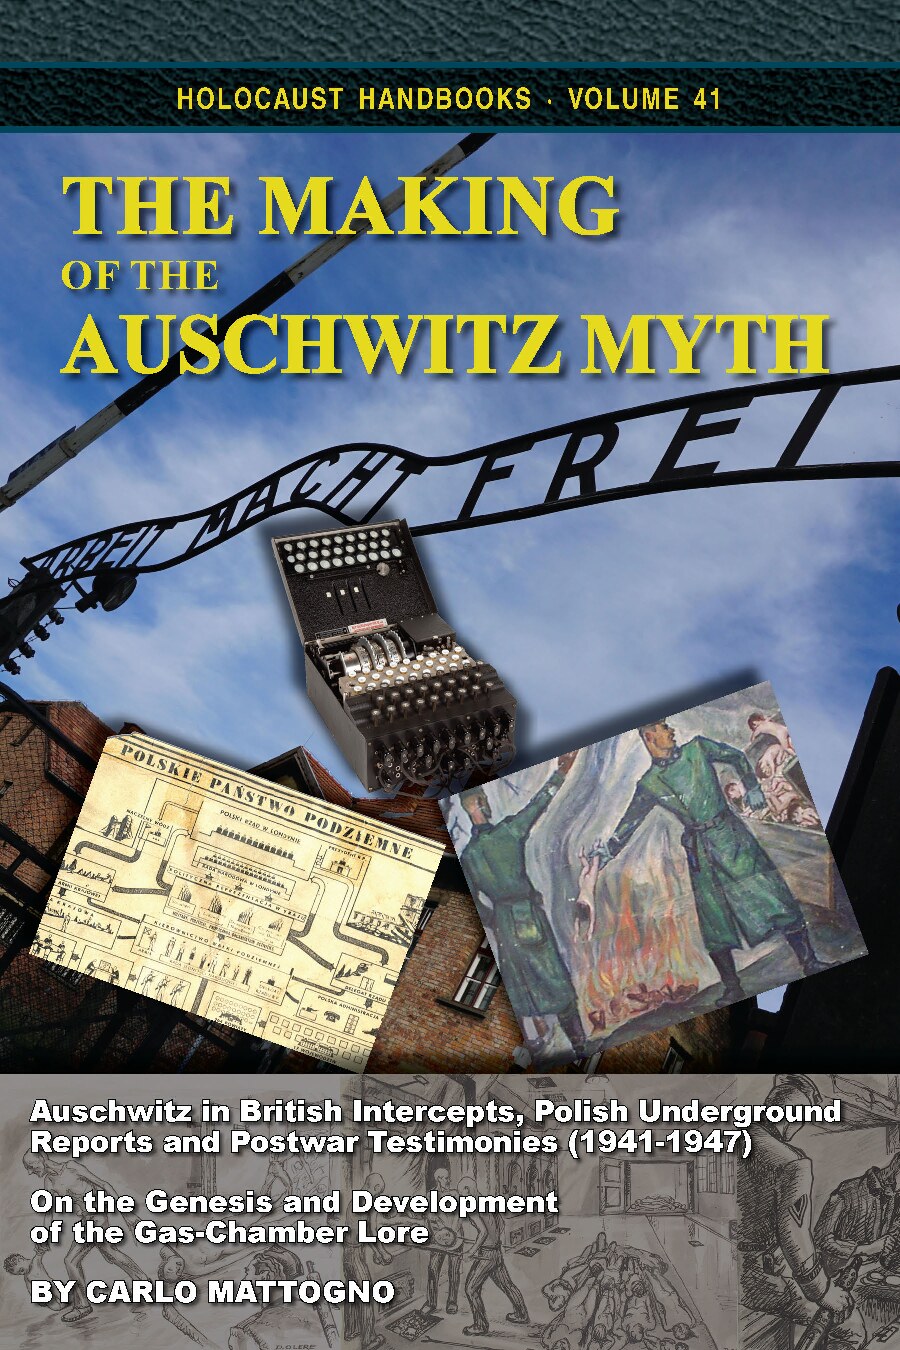 The Making of the Auschwitz Myth:  On the Genesis and Development of the Gas-Chamber Lore